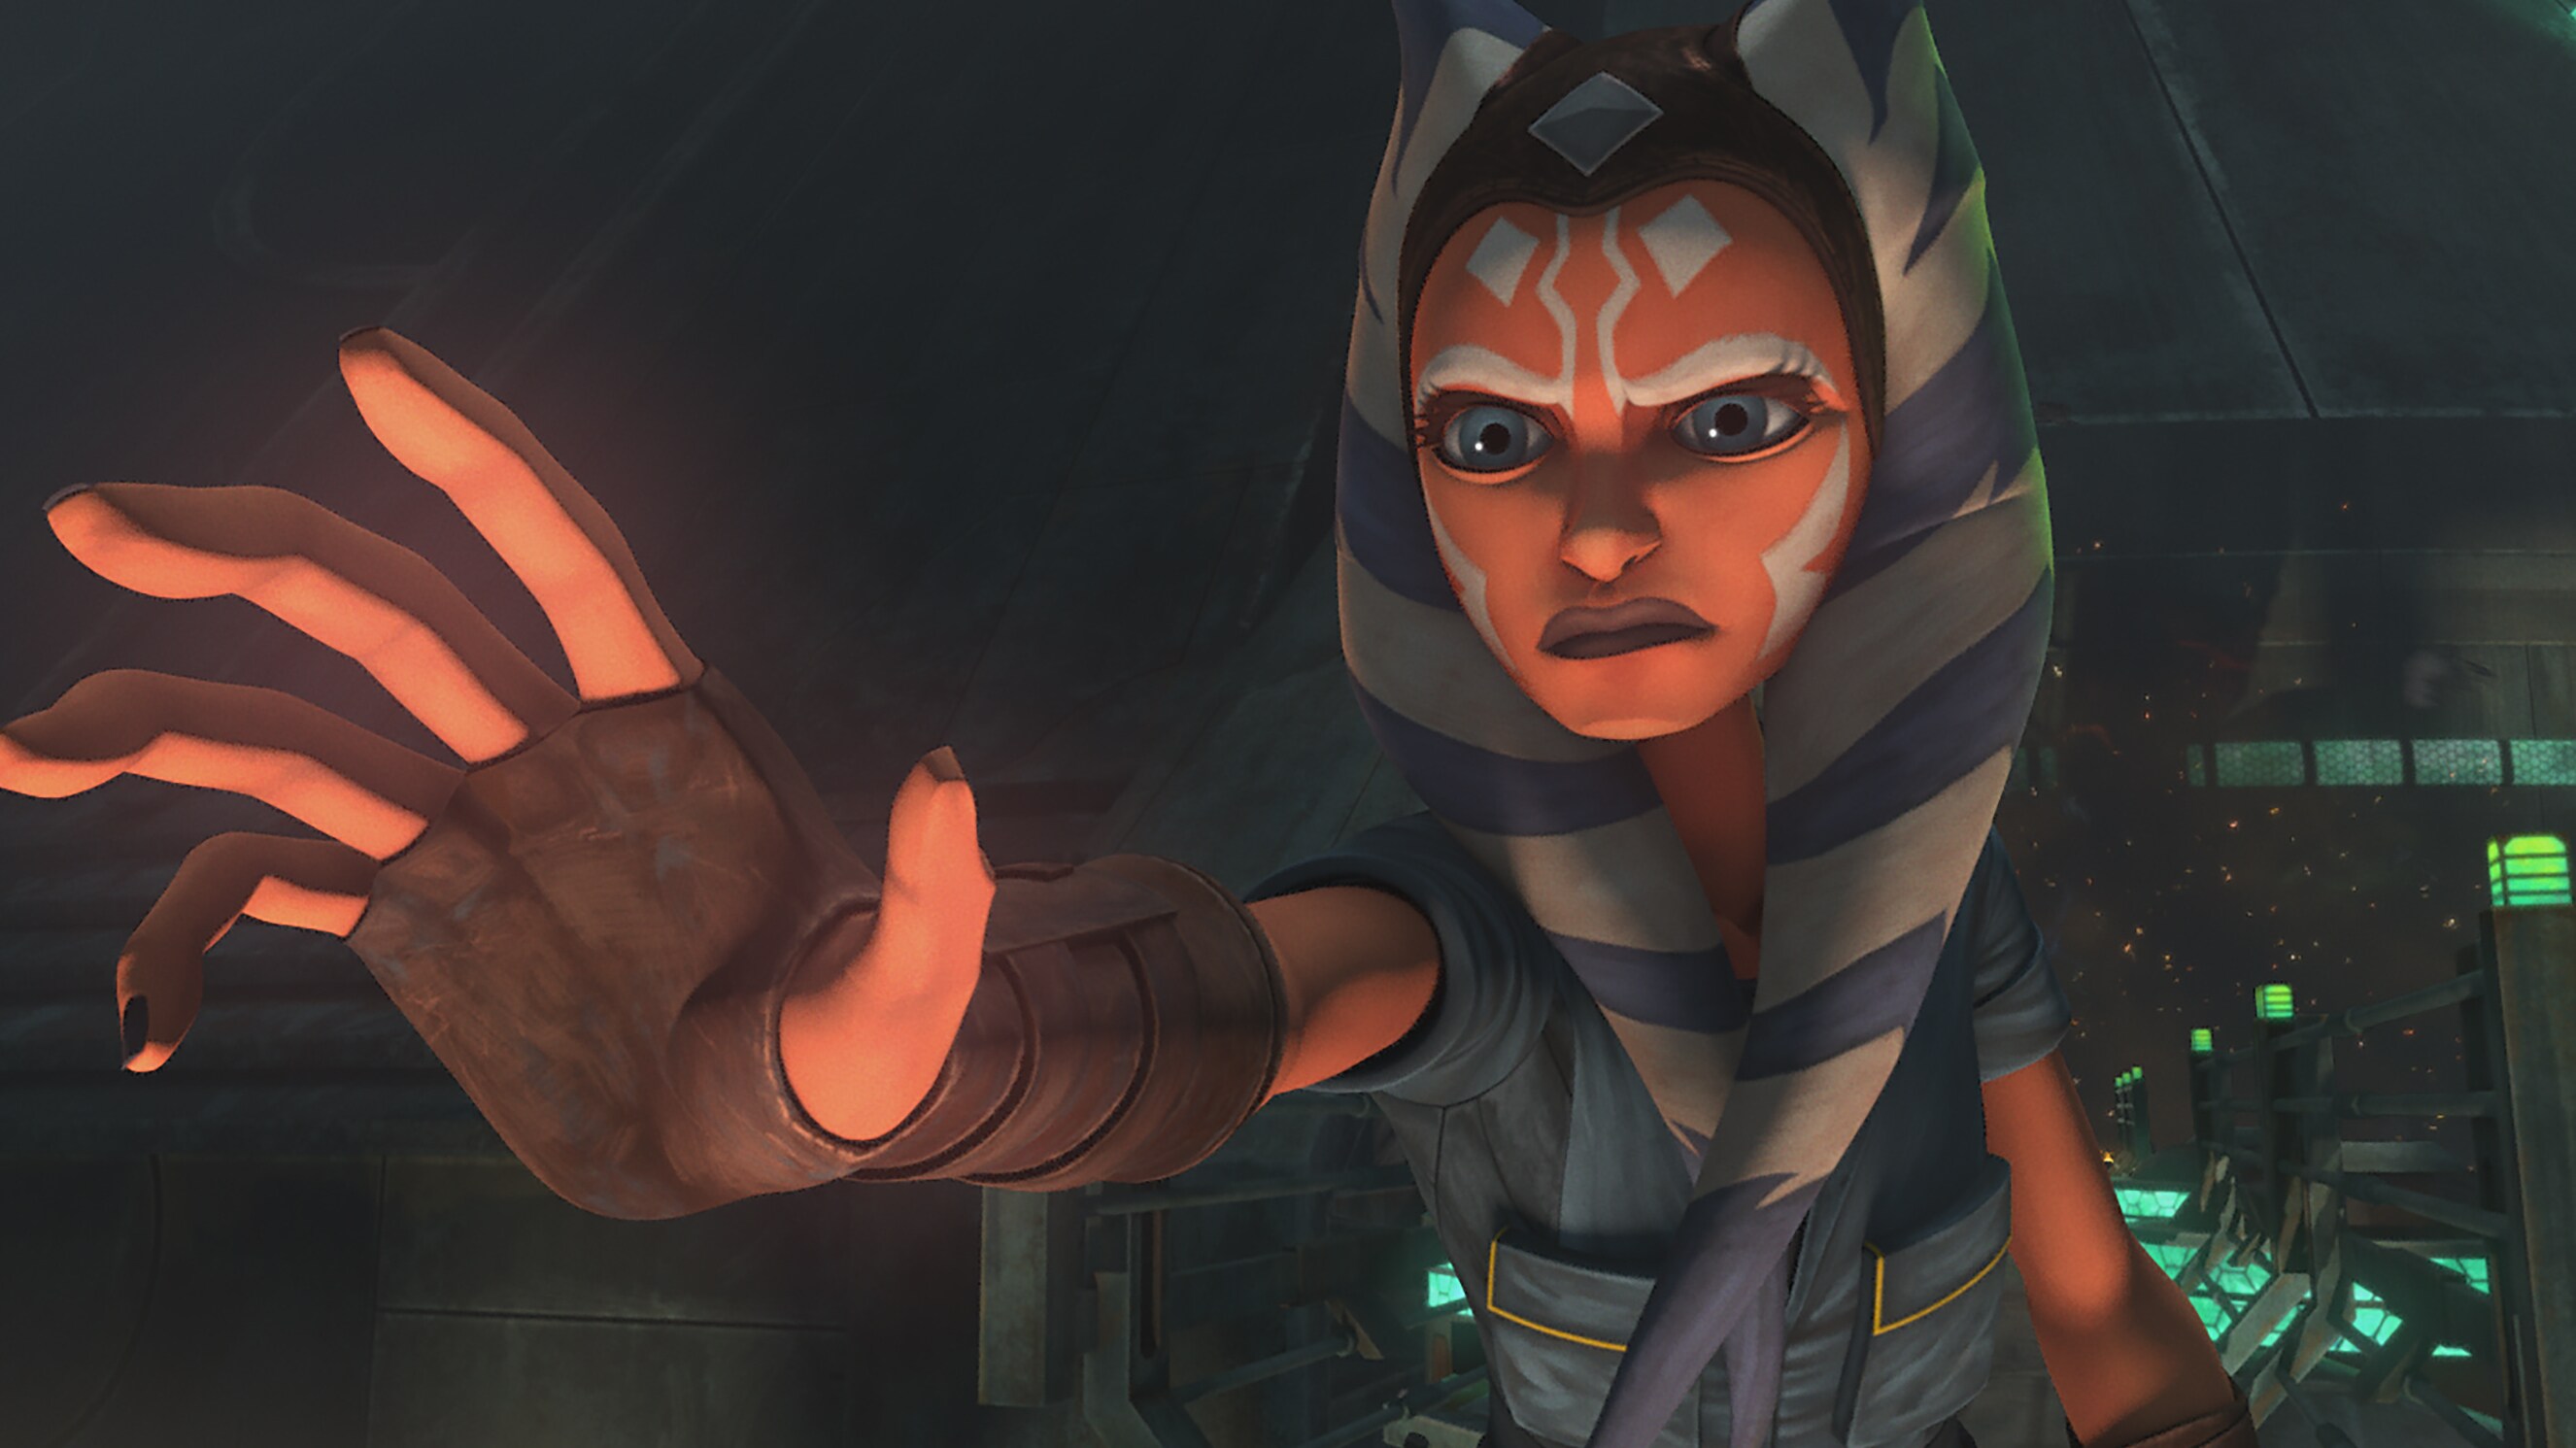 Ahsoka tries to evade the Pykes in STAR WARS: THE CLONE WARS, exclusively on Disney+.